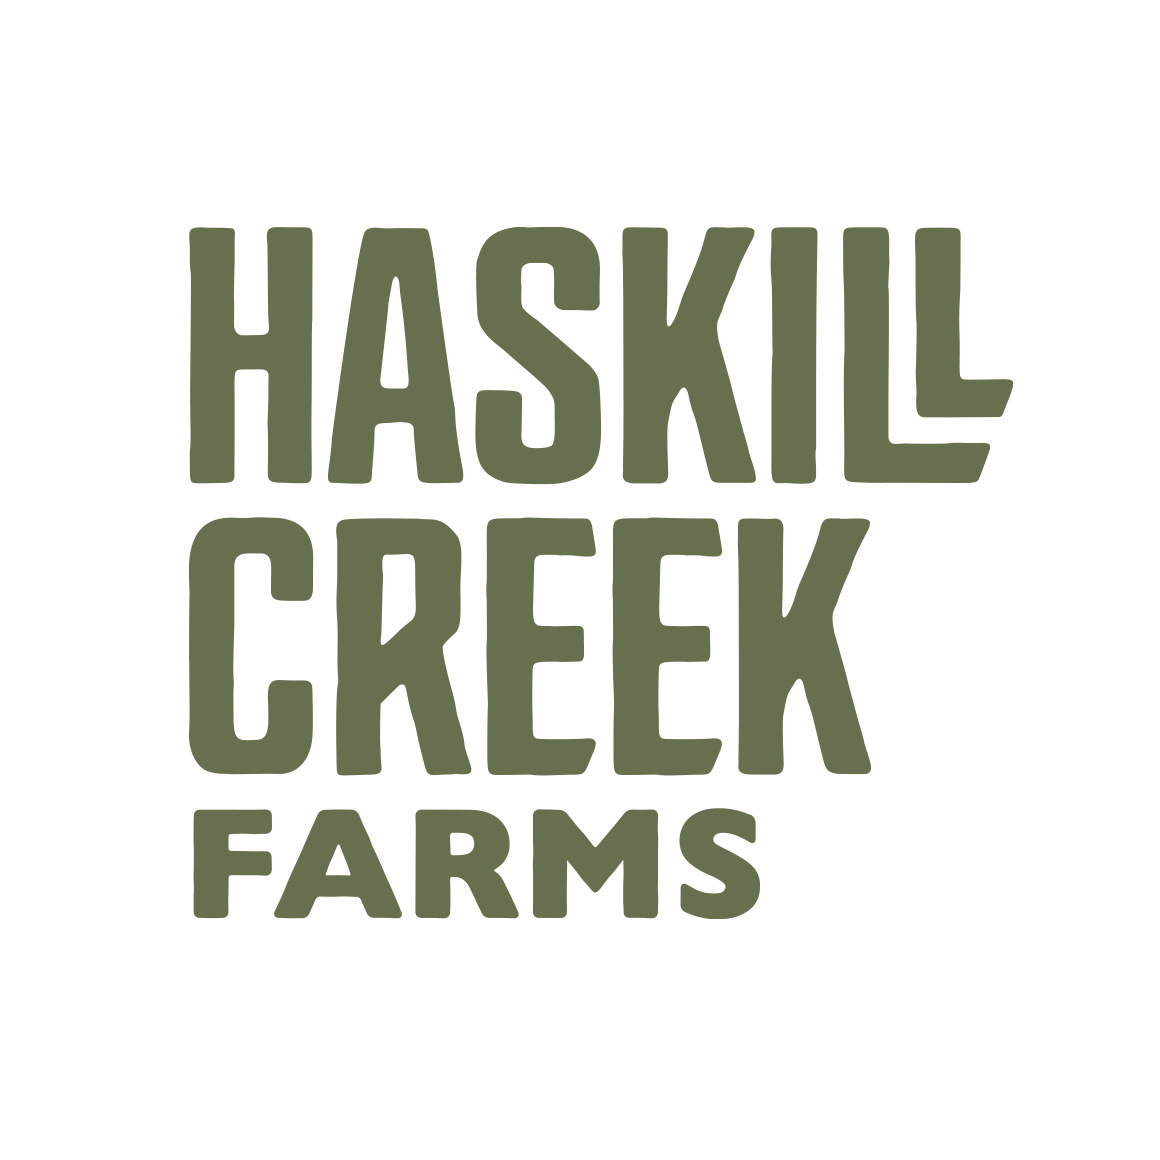 Haskill Creek Farms logo design by logo designer Joshua Berman Design for your inspiration and for the worlds largest logo competition